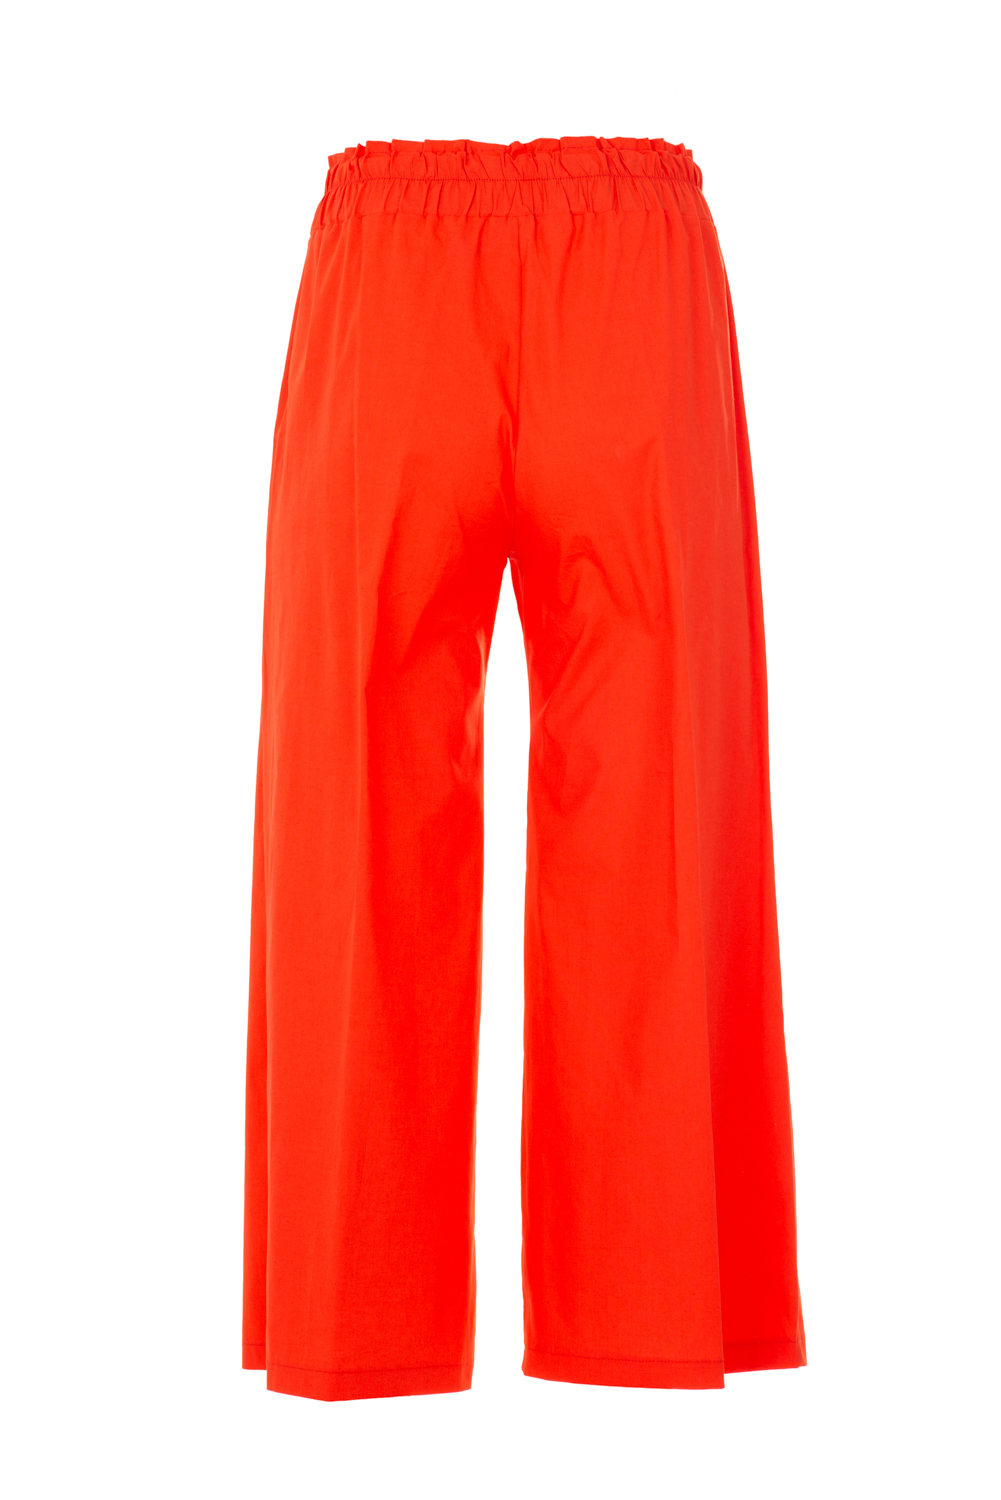 Cropped Utility Style Trousers with Elasticated Waistband